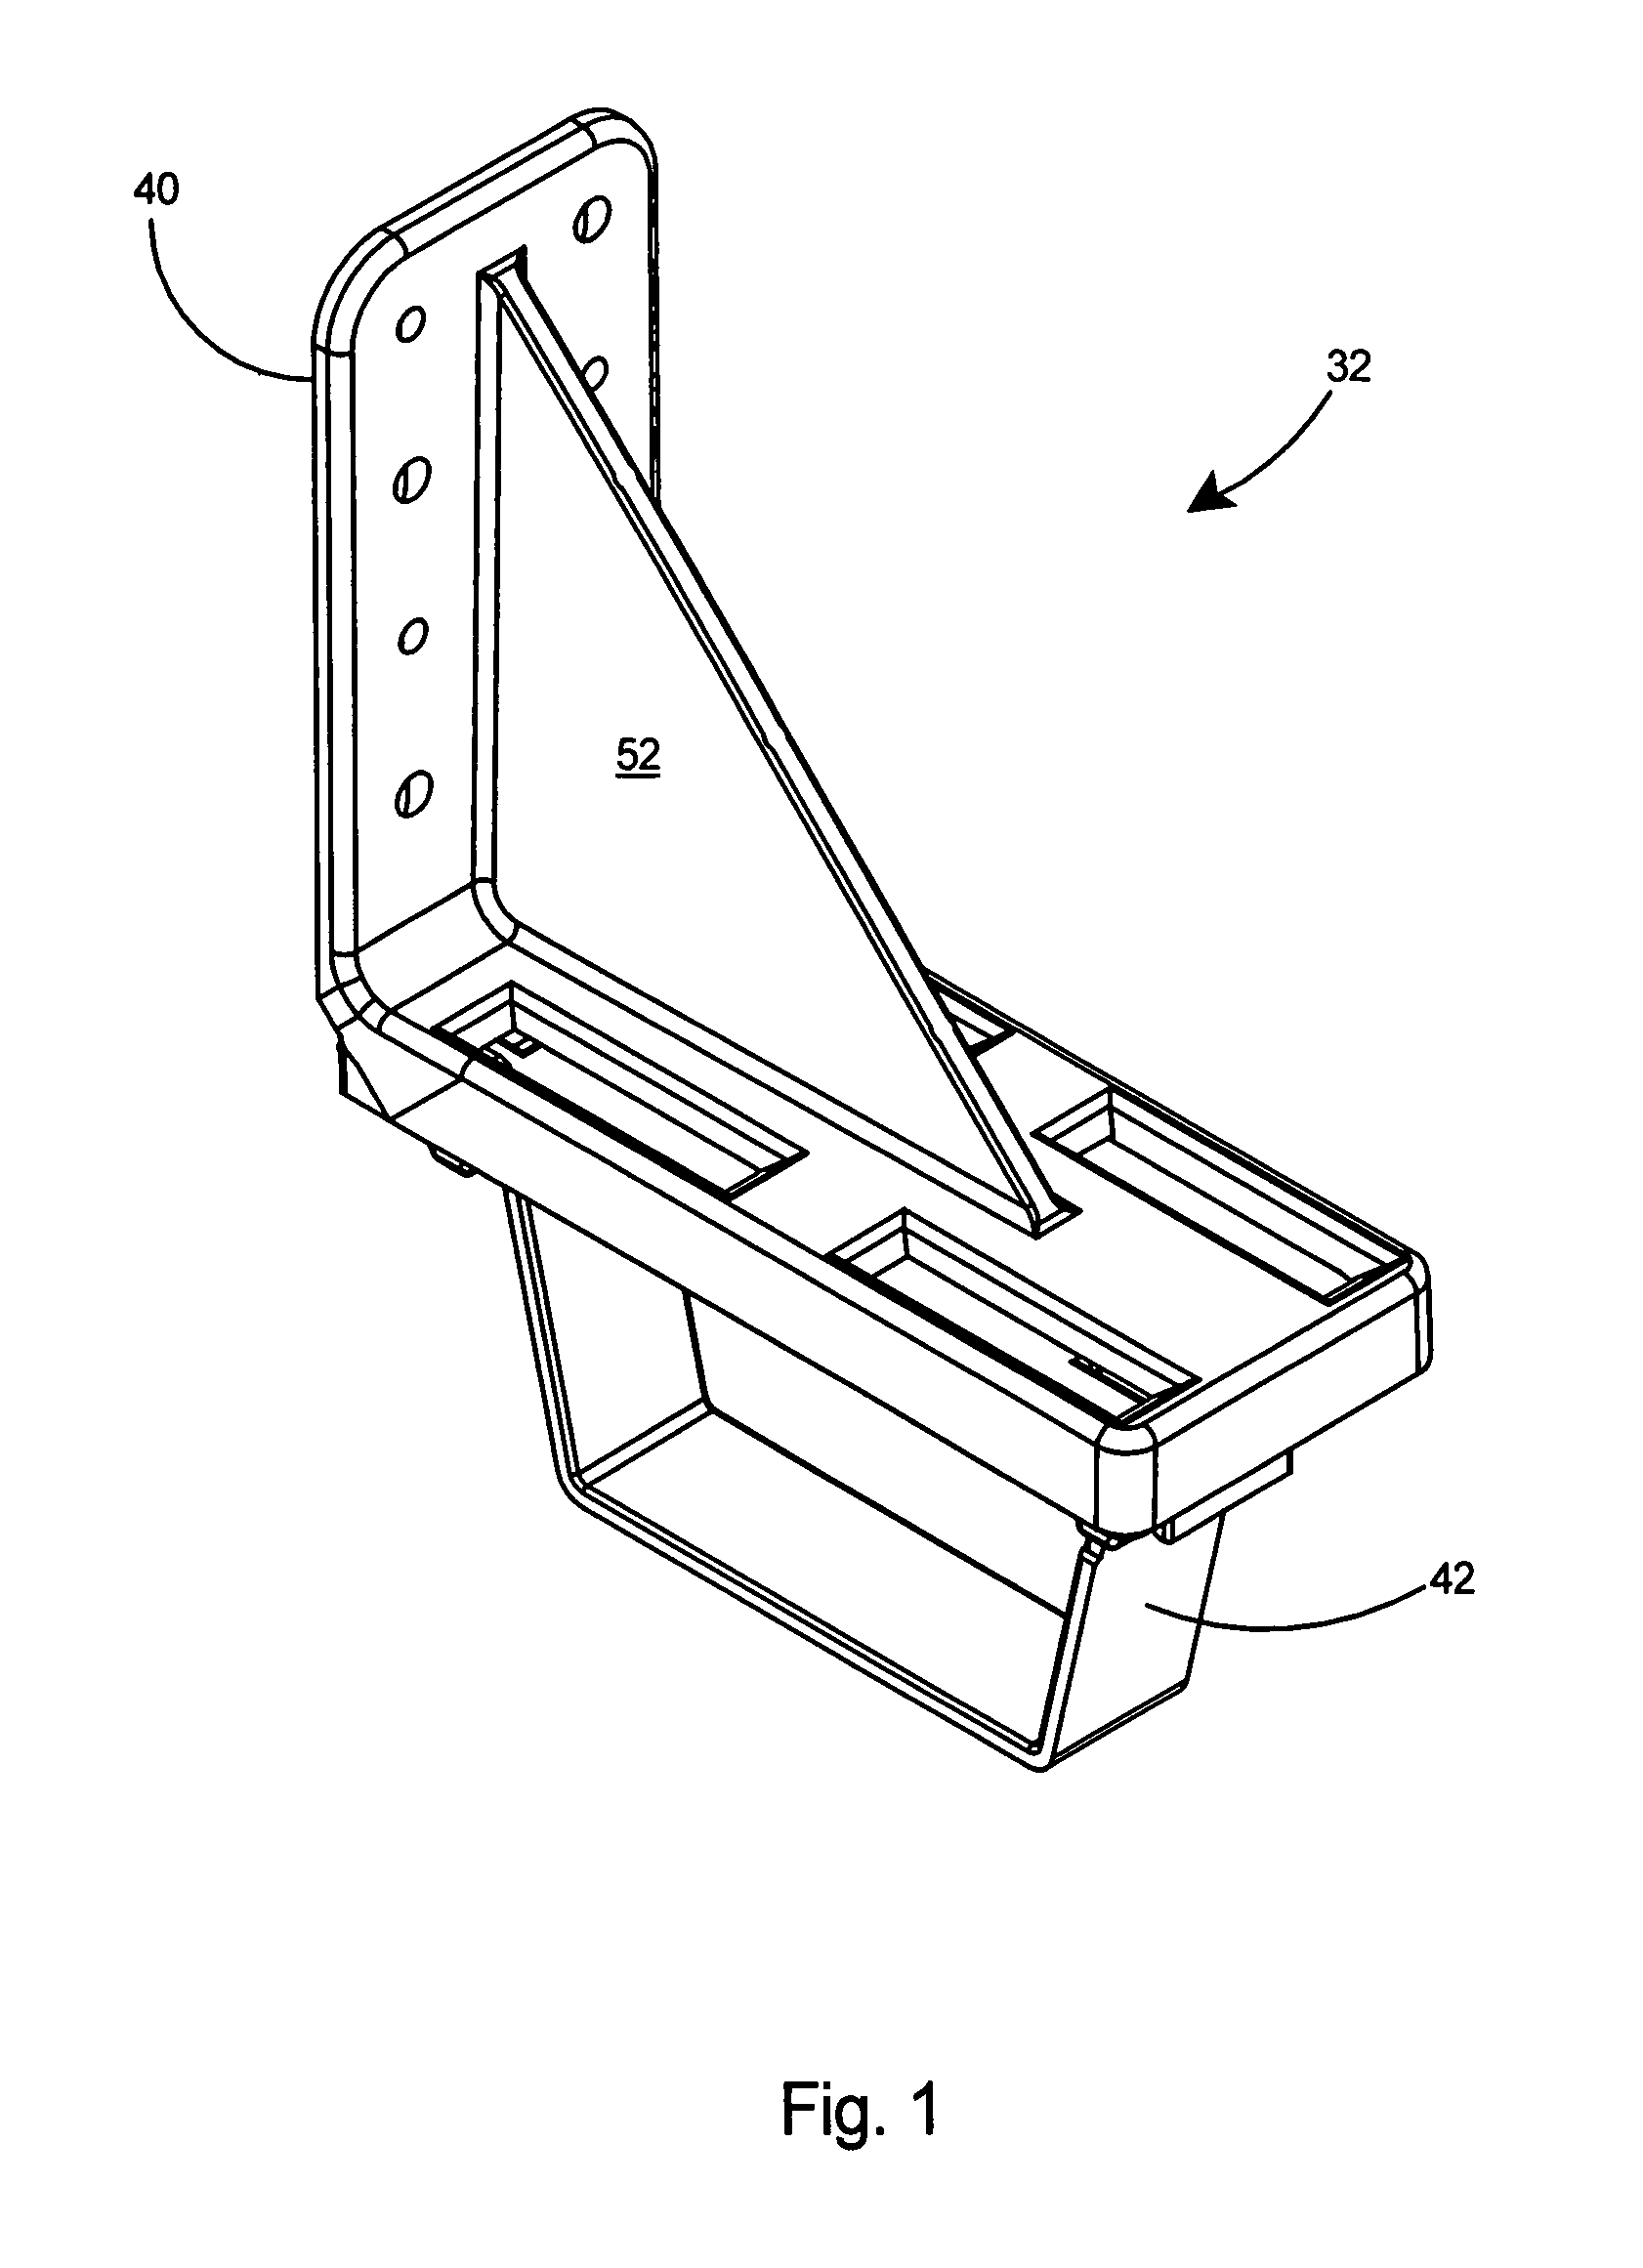 Cable support assembly for minimizing the bend radius of cables